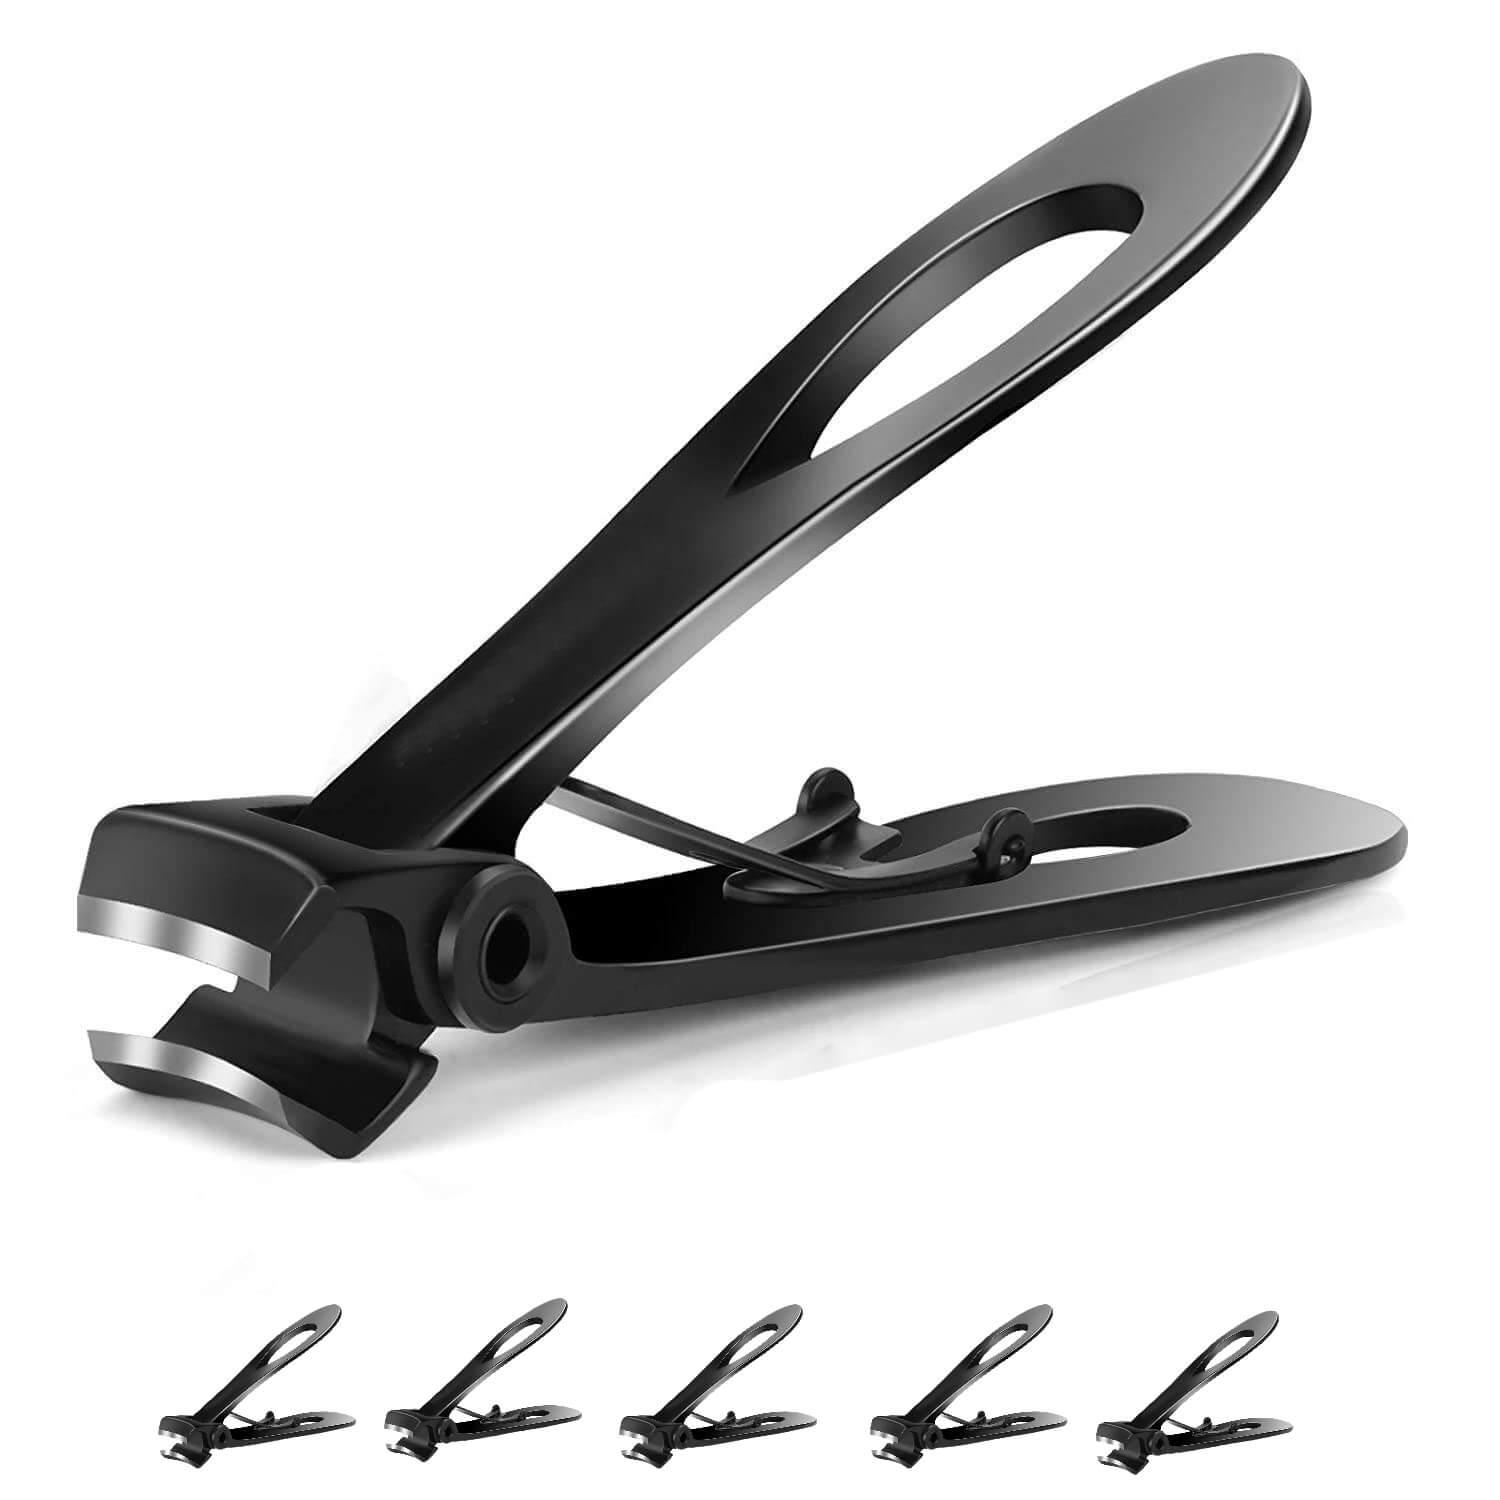 DNS Stainless Steel Nail Clipper - Black Curve Blade #79001 (Pack of 6)